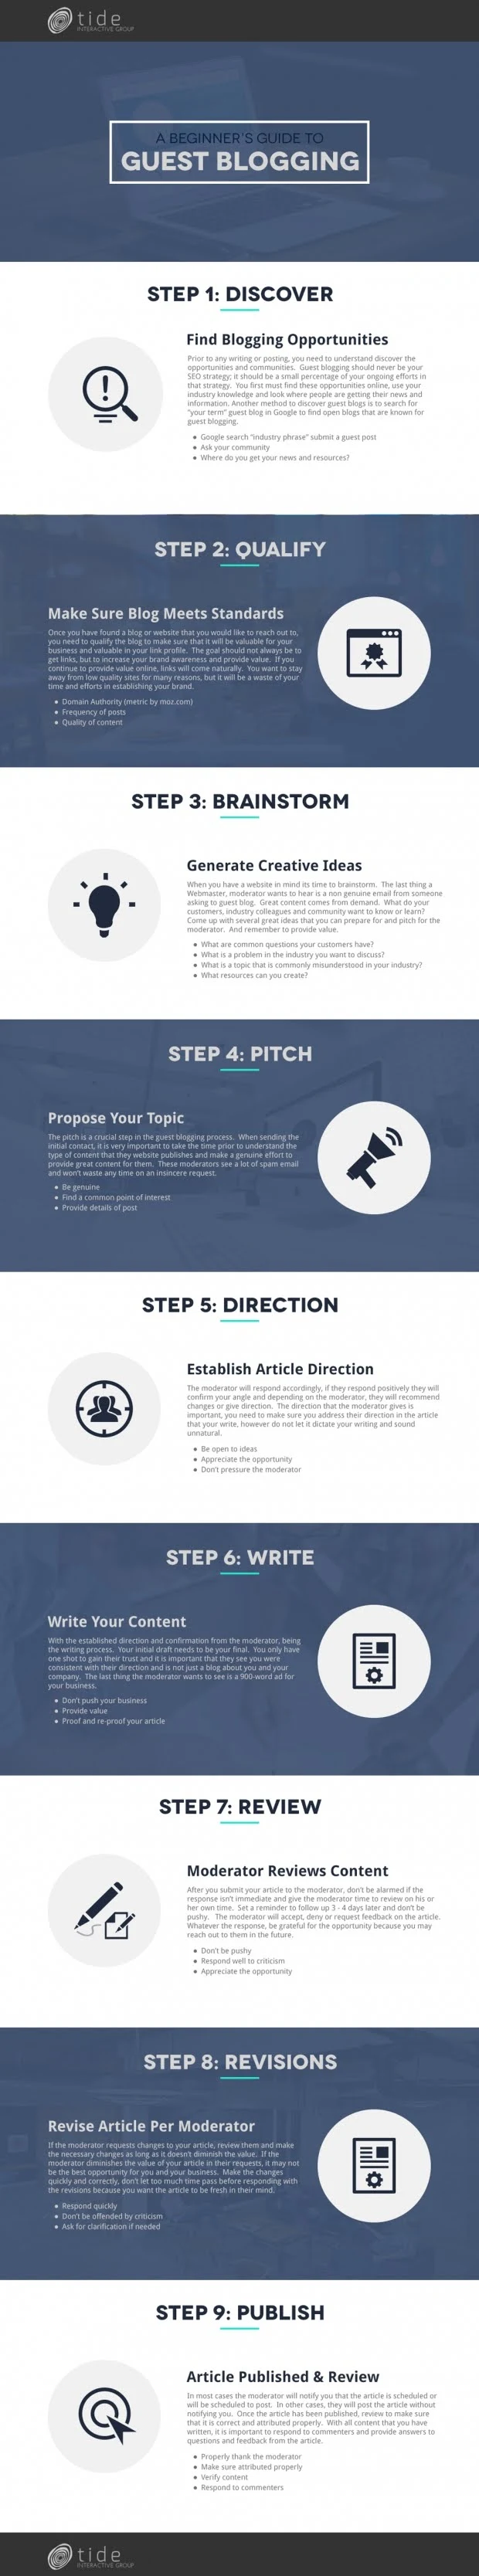 A Beginner’s Guide To Guest Blogging - #infographic